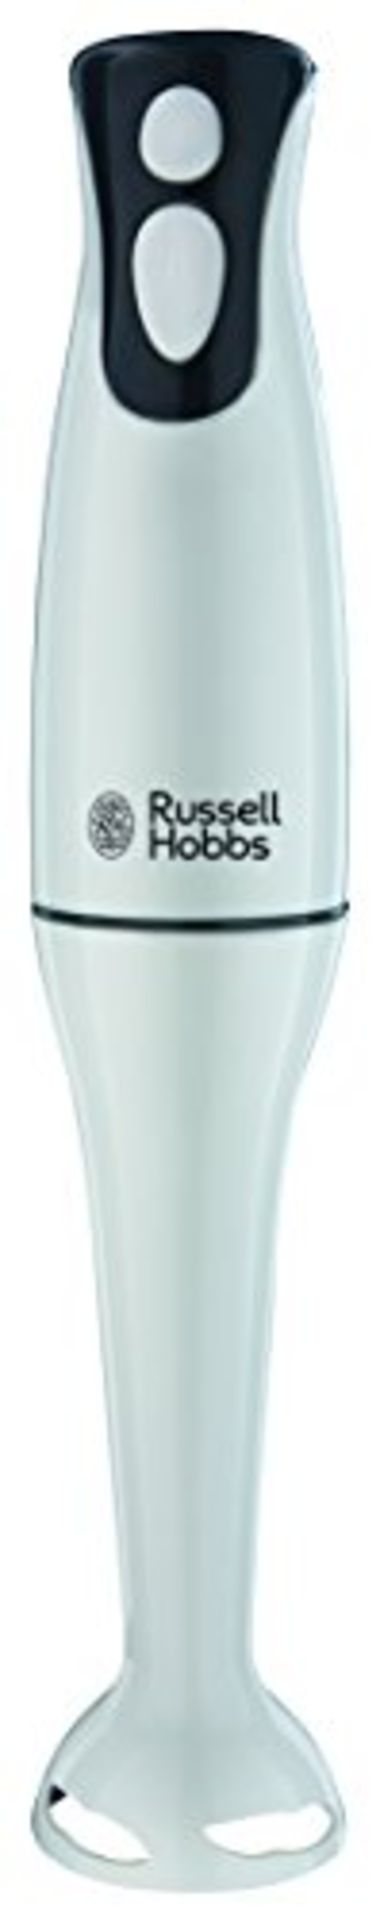 Russell Hobbs 22241 Food Collection Hand Blender, 200 W - White